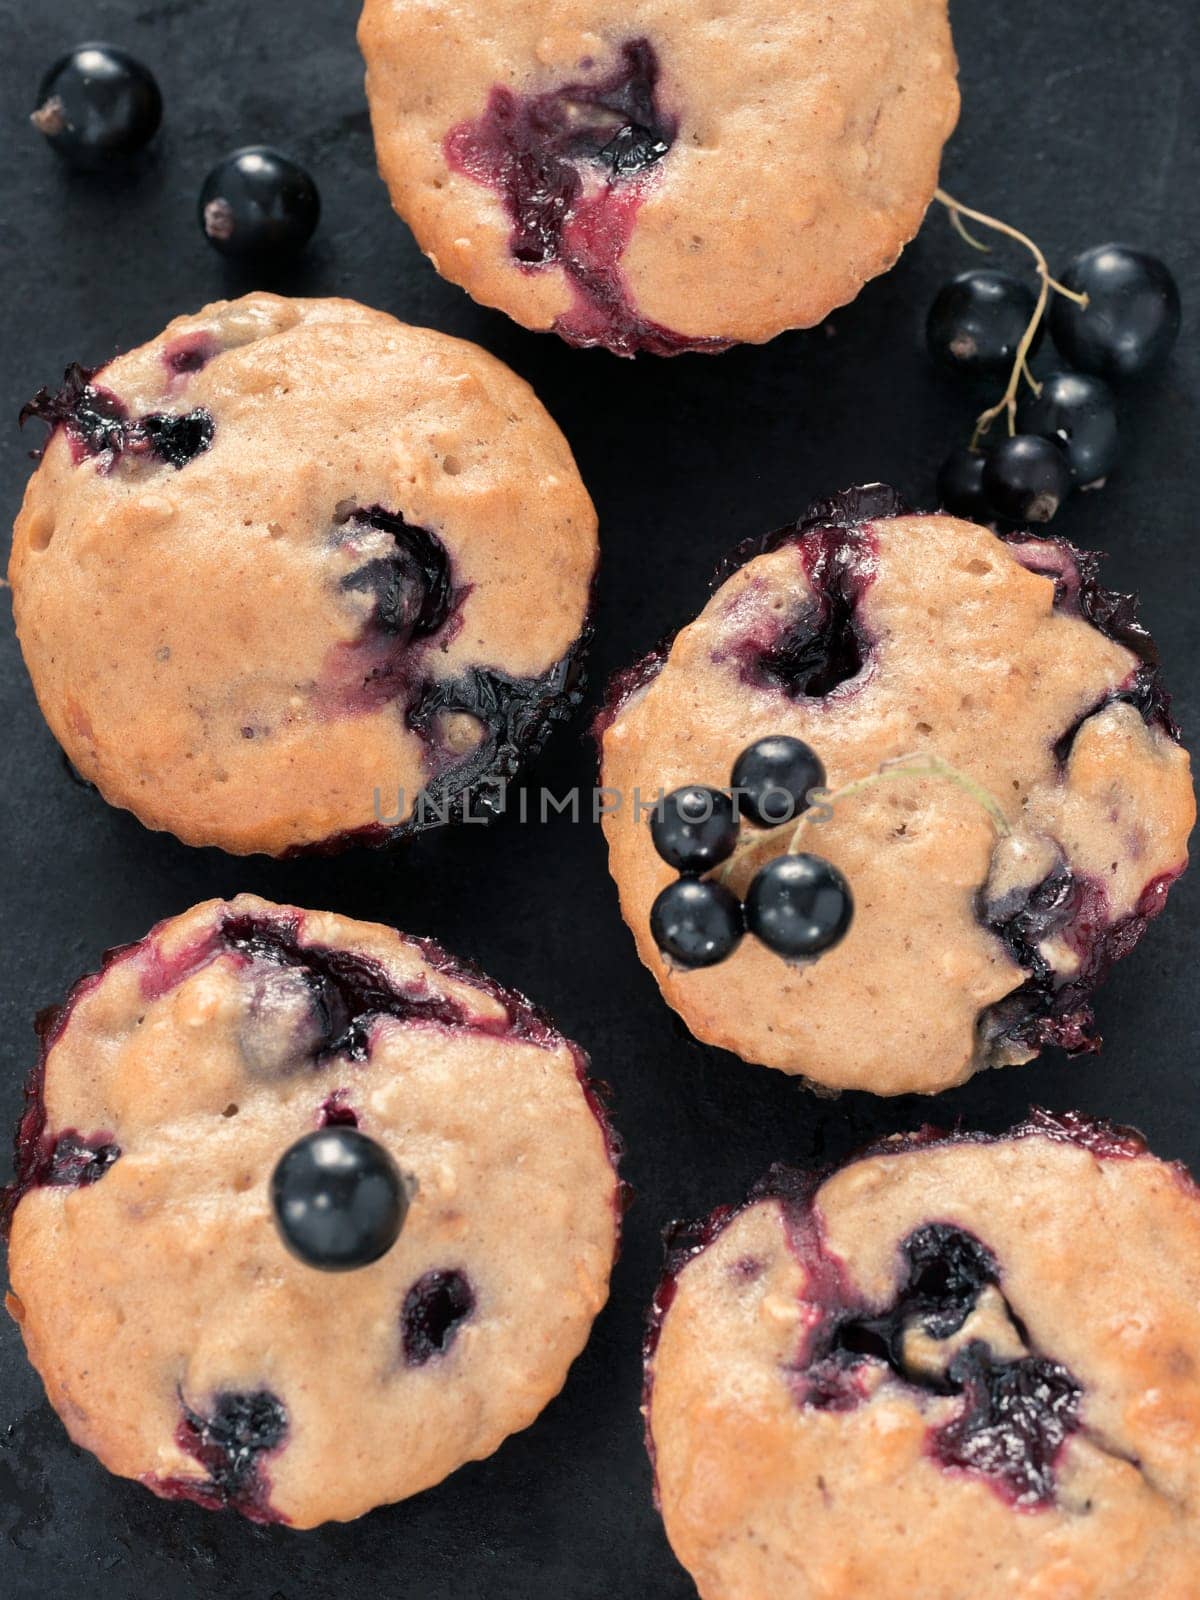 Muffins with black currant by fascinadora